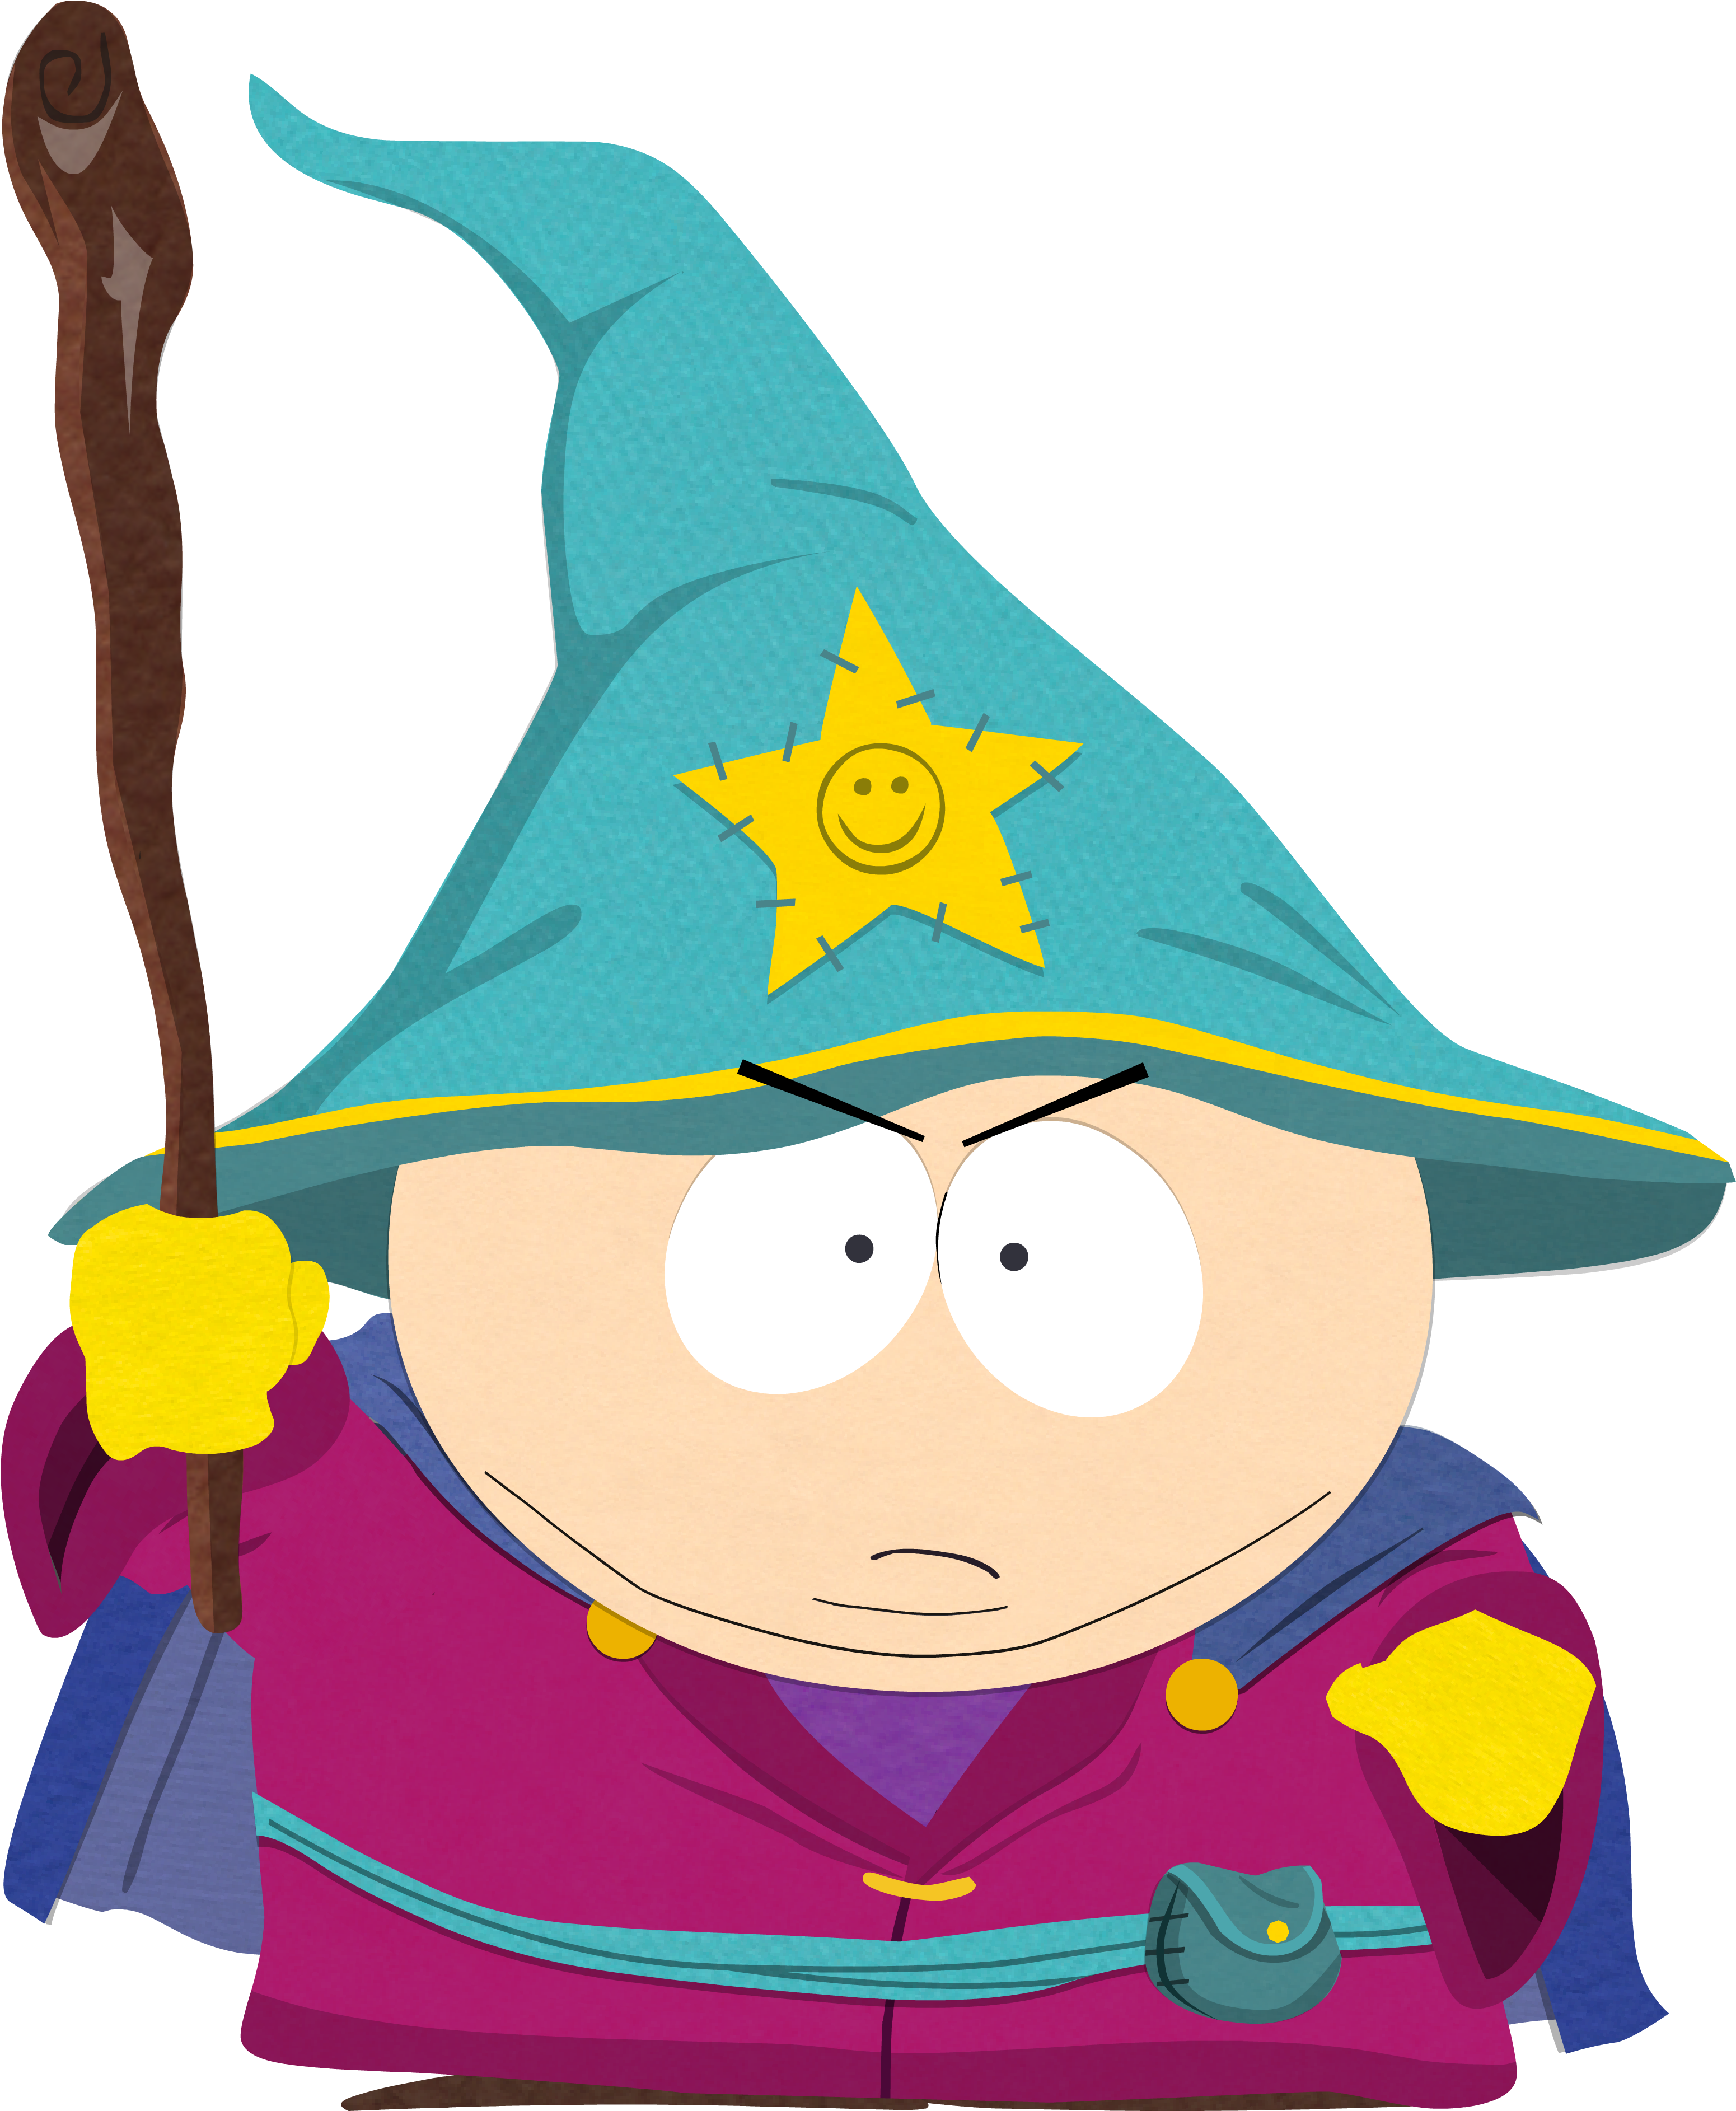 South - South Park The Stick Of Truth Cartman (4000x4000)